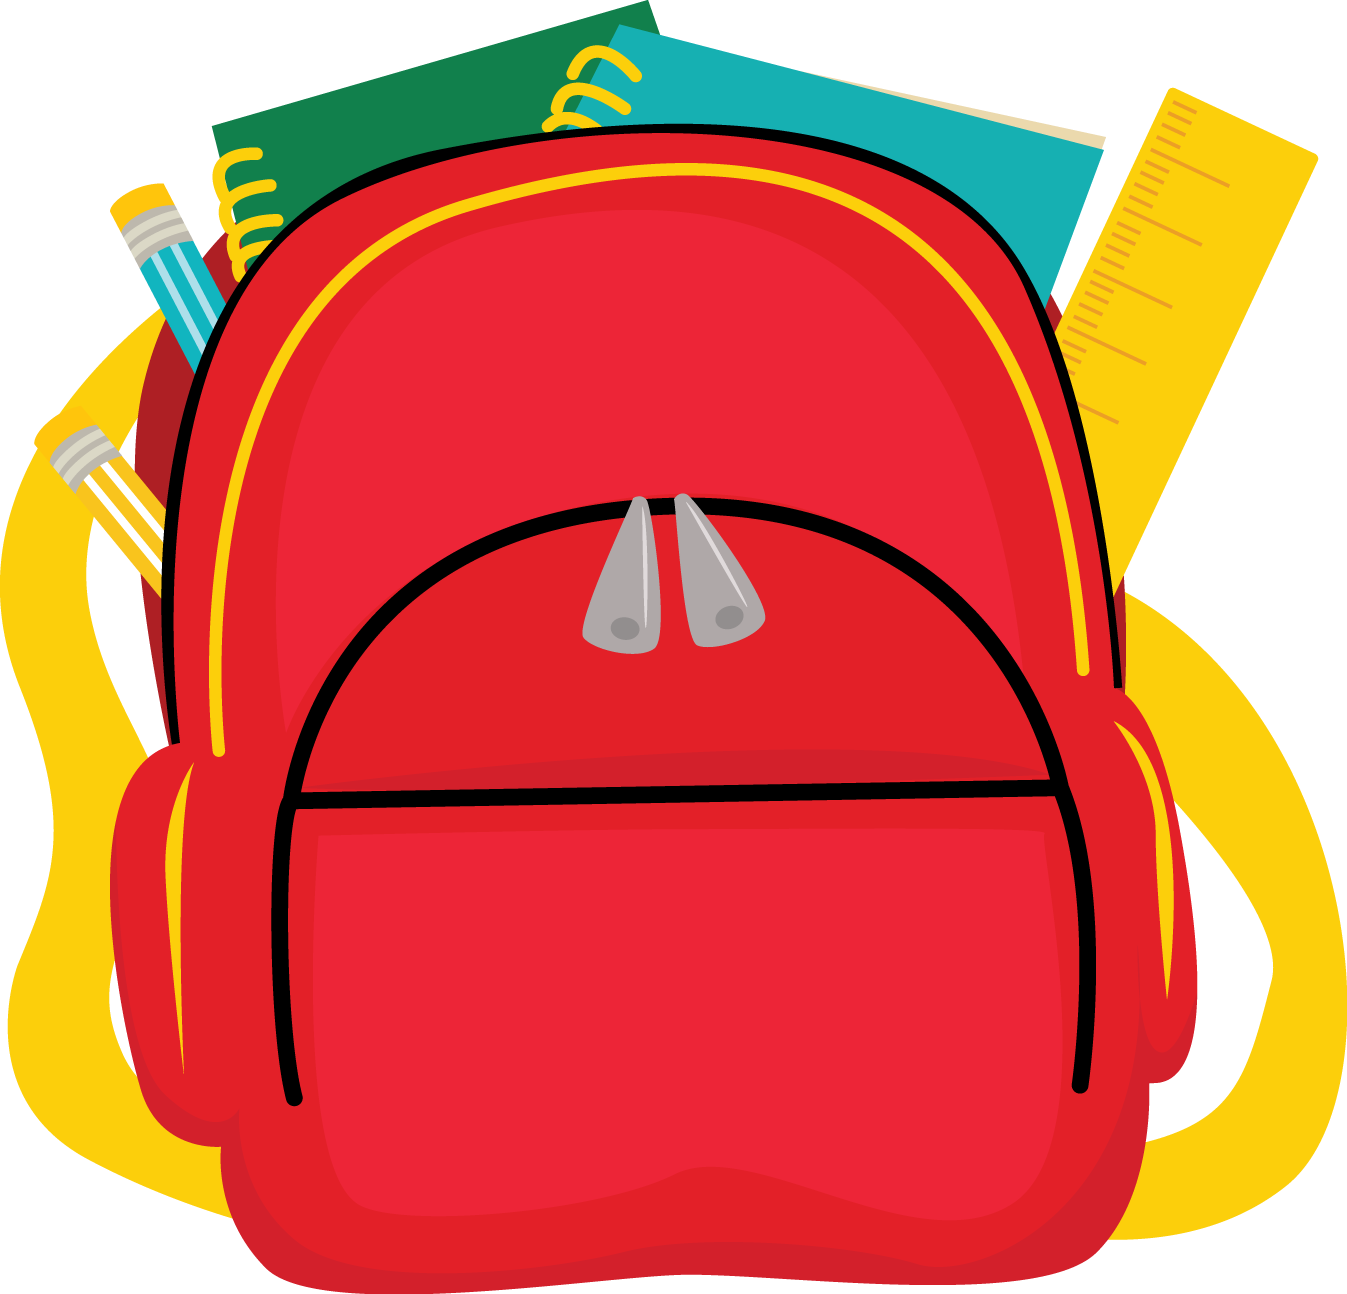 School Bag Png Image Free Download And Clipart Image For Free Download ...